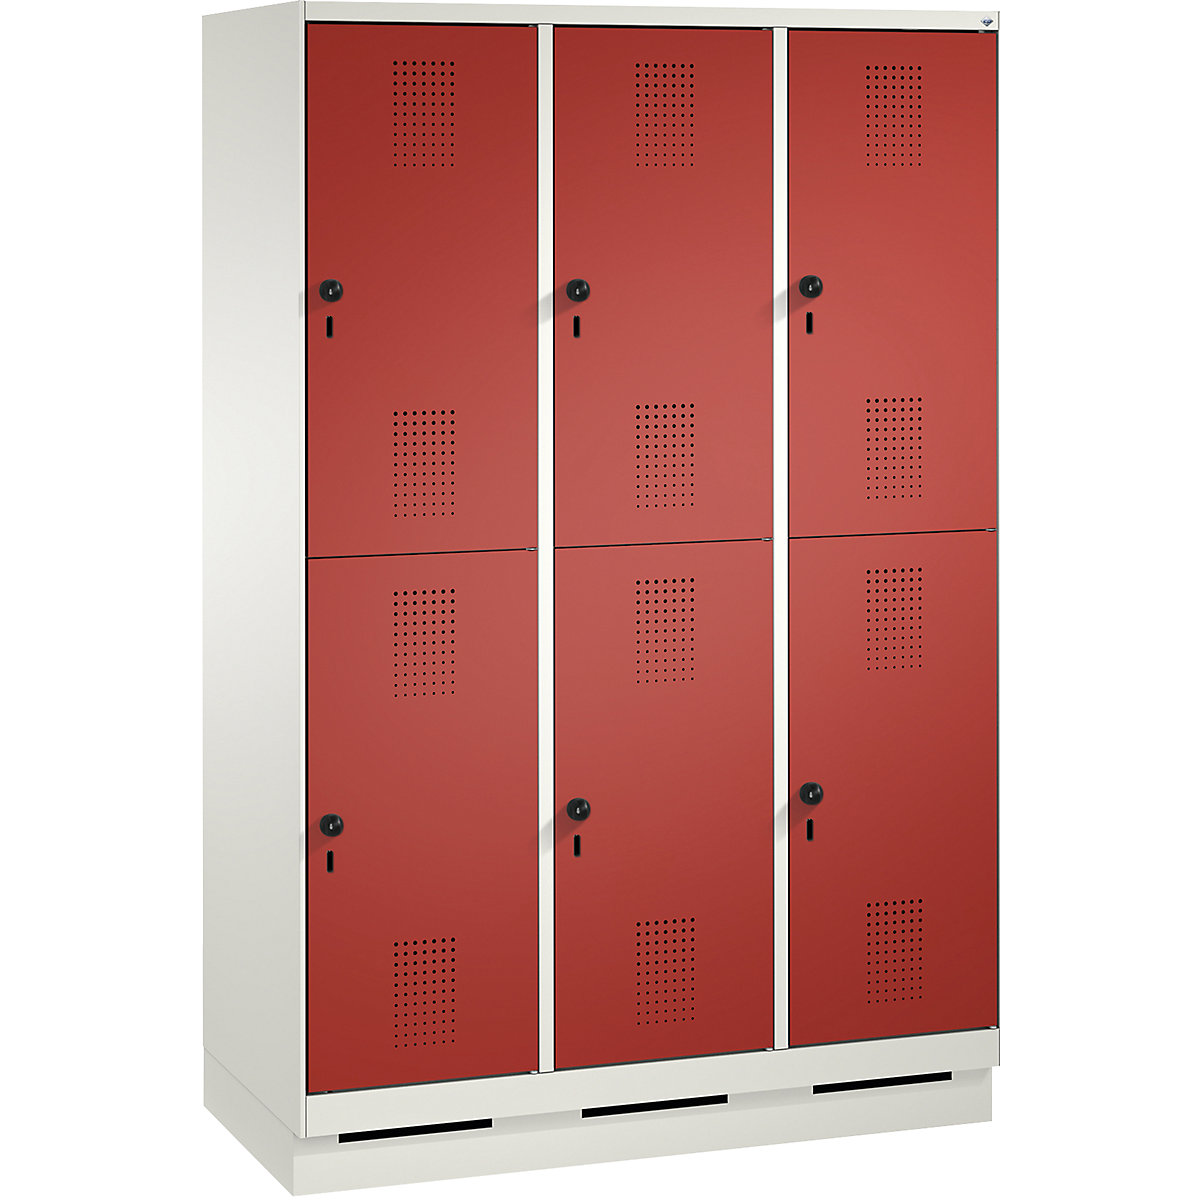 EVOLO cloakroom locker, double tier, with plinth – C+P, 3 compartments, 2 shelf compartments each, compartment width 400 mm, traffic white / flame red-3